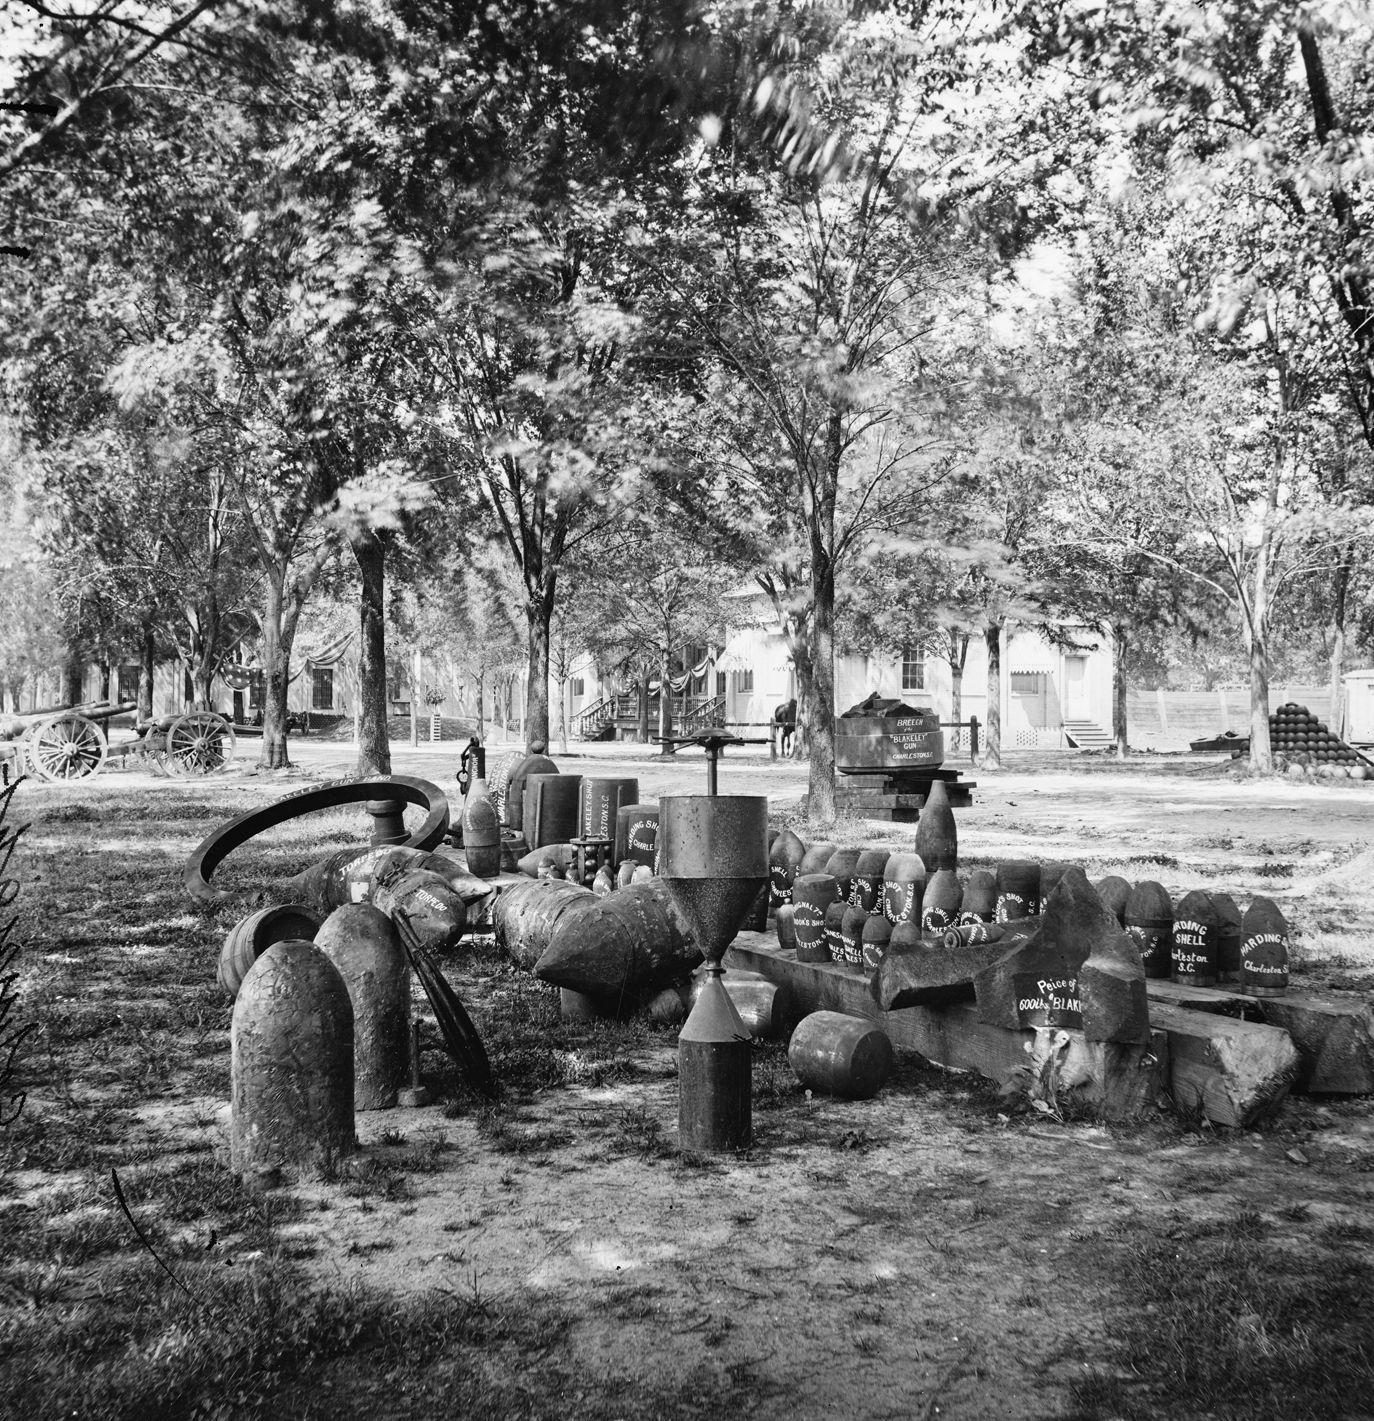 Captured Confederate ordnance, including torpedos and artillery shells. The Confederate high command had initial reservations about using naval and land mines, but it eventually embraced the technology as a way to offset the tremendous manpower and equipment advantages of Union forces.